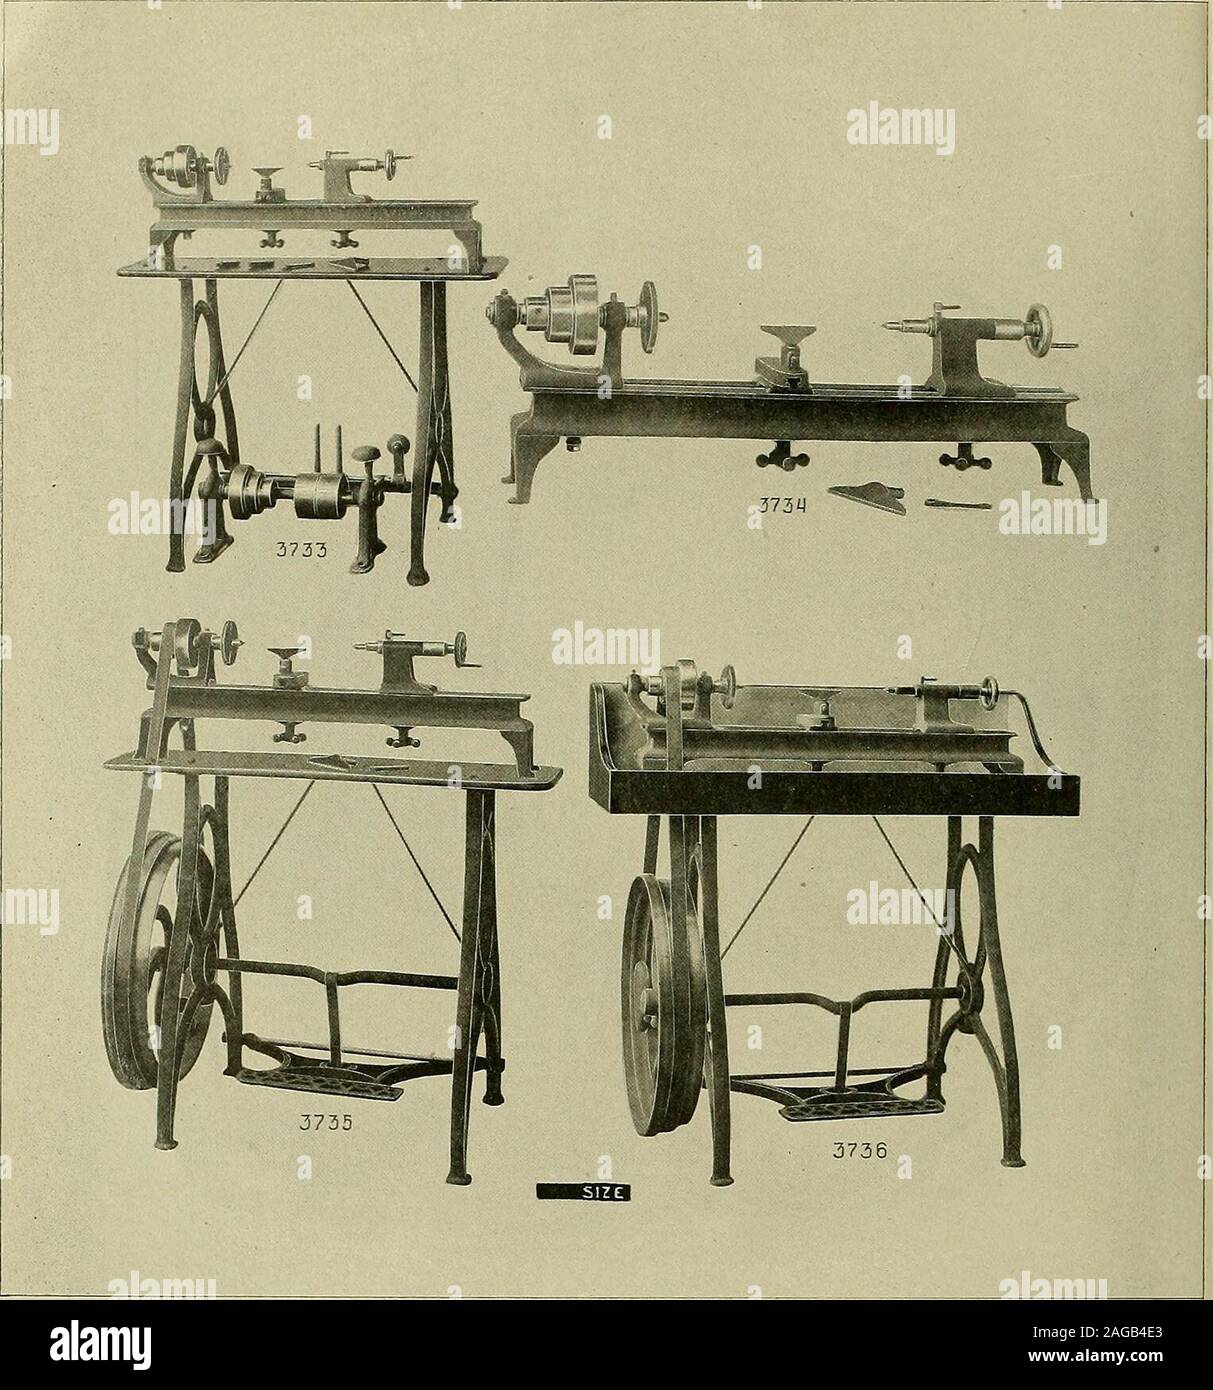 . 20th century catalogue of supplies for watchmakers, jewelers and kindred trades. LATHES. Grinding and Polishing. No. 3727. Improved Polishing Lathe, weight 160 lbs., with No. 3745 head |20. 00 With No. 3743 head 18.00 3728. Improved Polishing Lathe, weight 110 lbs 14.00 Extra for head, with chuck 1.00 3729. Polishing Lathe TOO Extra for head, with chuck 25 No. 3730. Opticians and Lapidaries Grinding Lathe 110.00 3731. Dental Lathe, with swing treadle, high speed, with head 20.00 3732. Improved Polishing Lathe, designedespecially for light buffing, requiredby gold and silver platers, weight15 Stock Photo